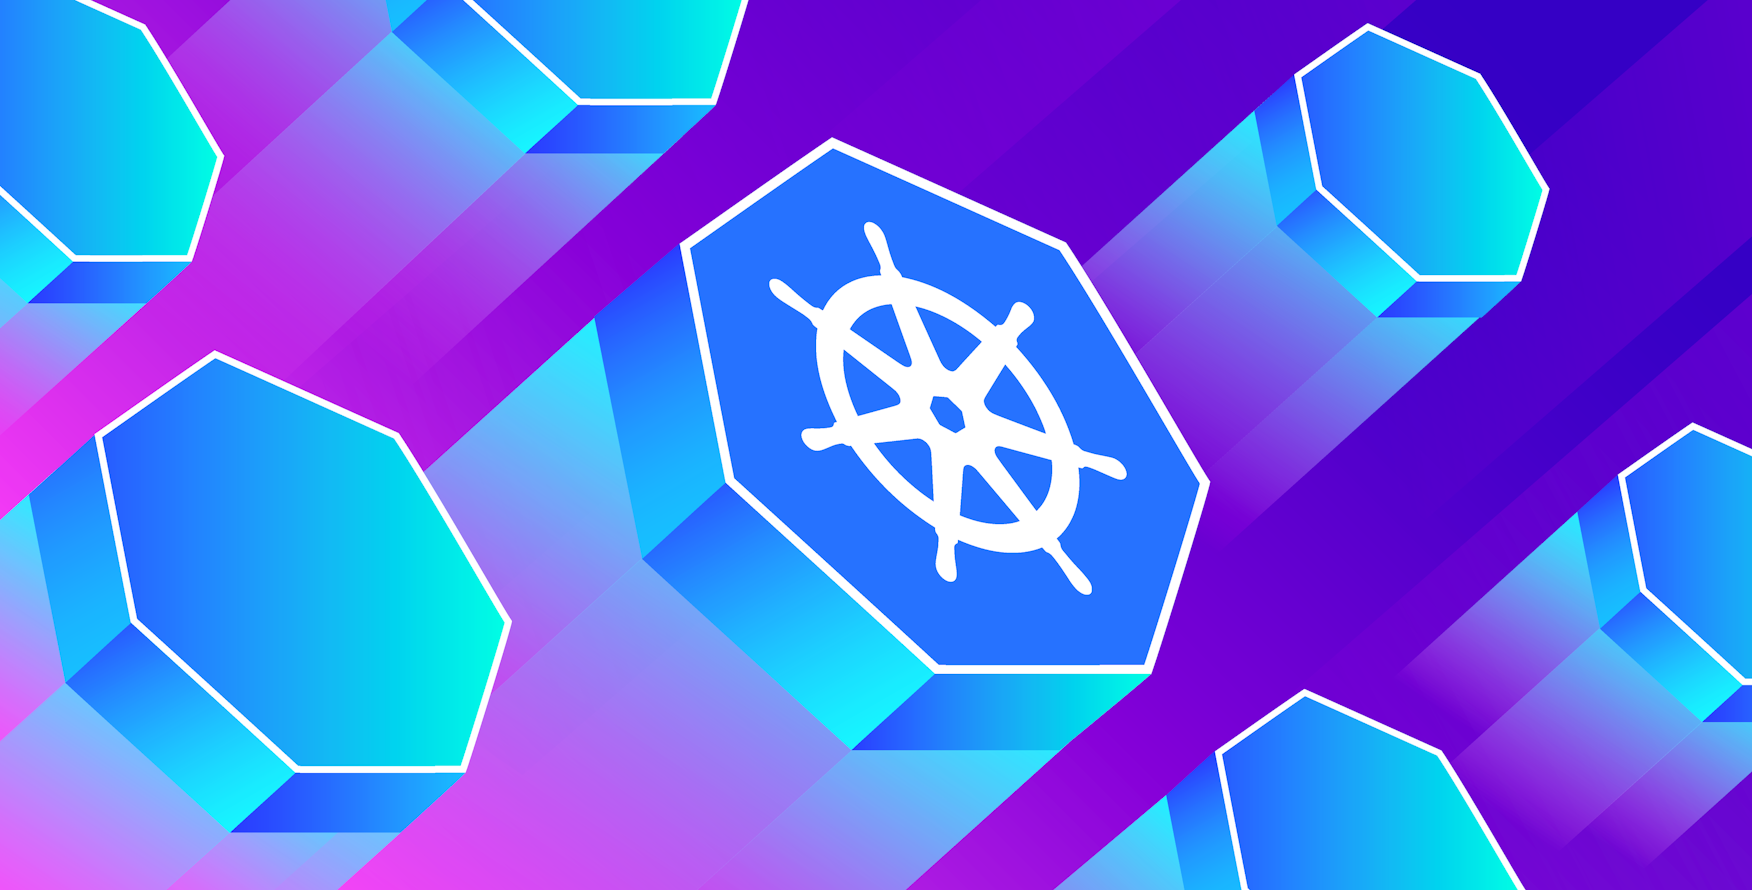 What's New For Security In Kubernetes 1.25